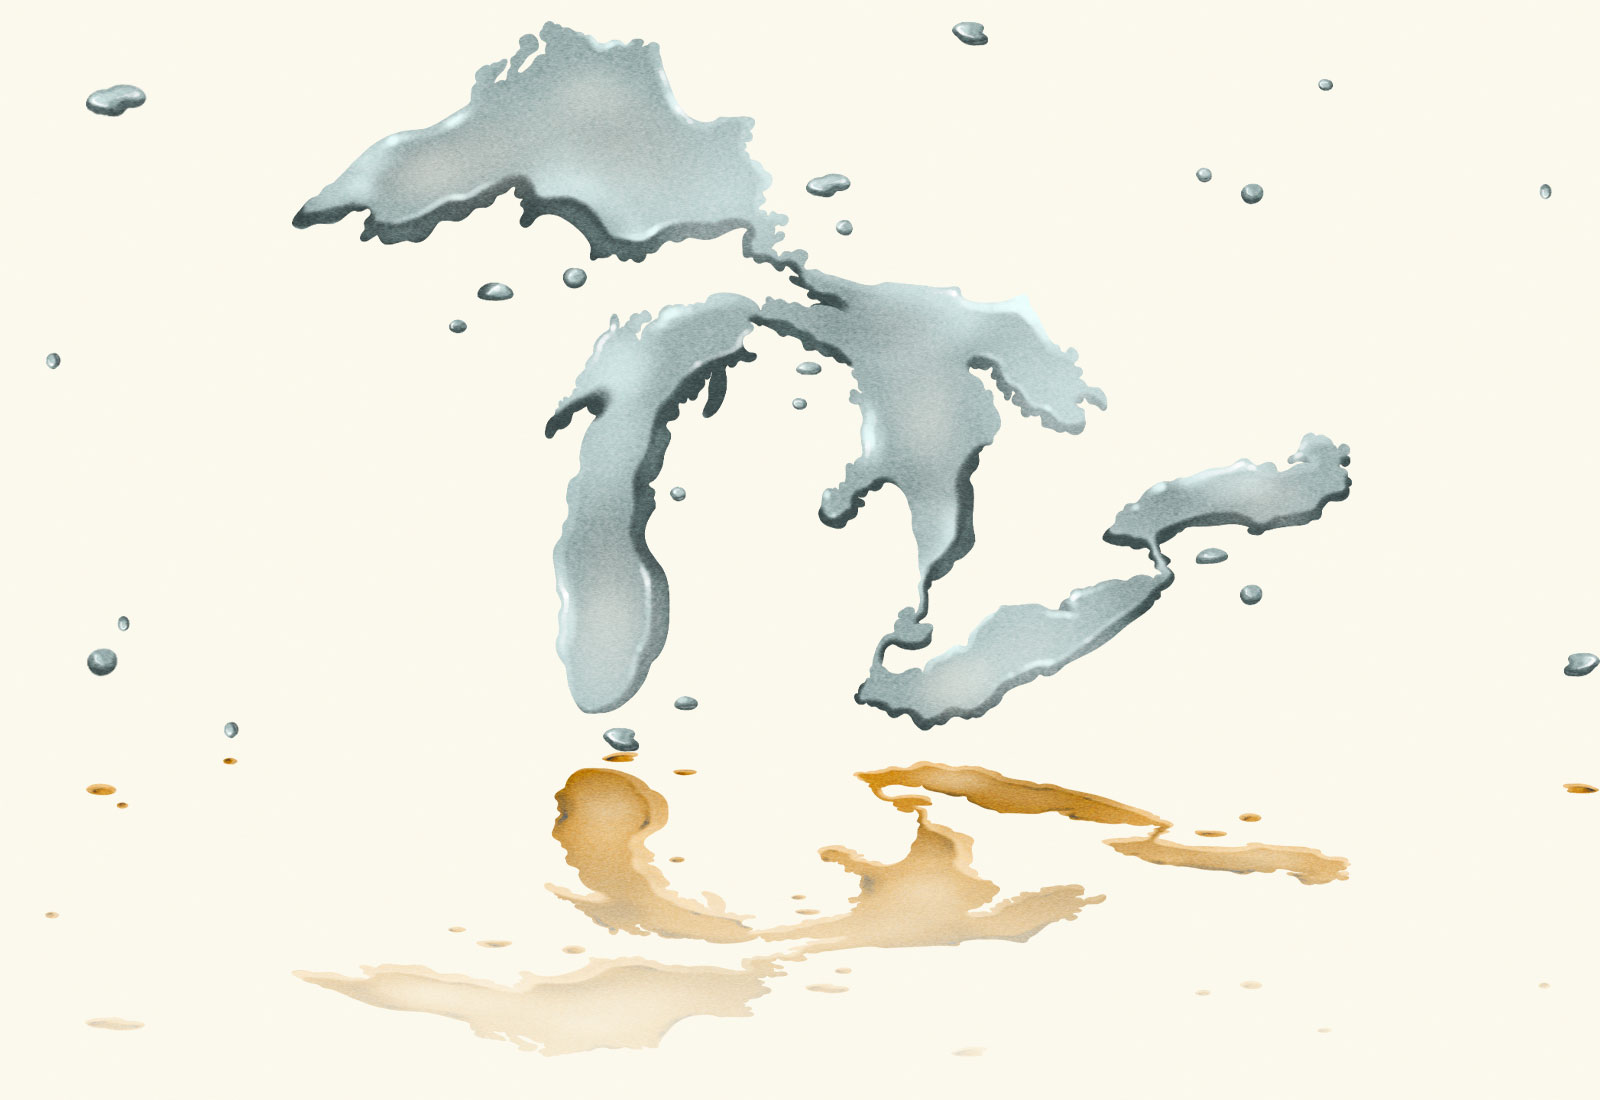 Illustration: Silhouette of the Great Lakes as a puddle with water droplets